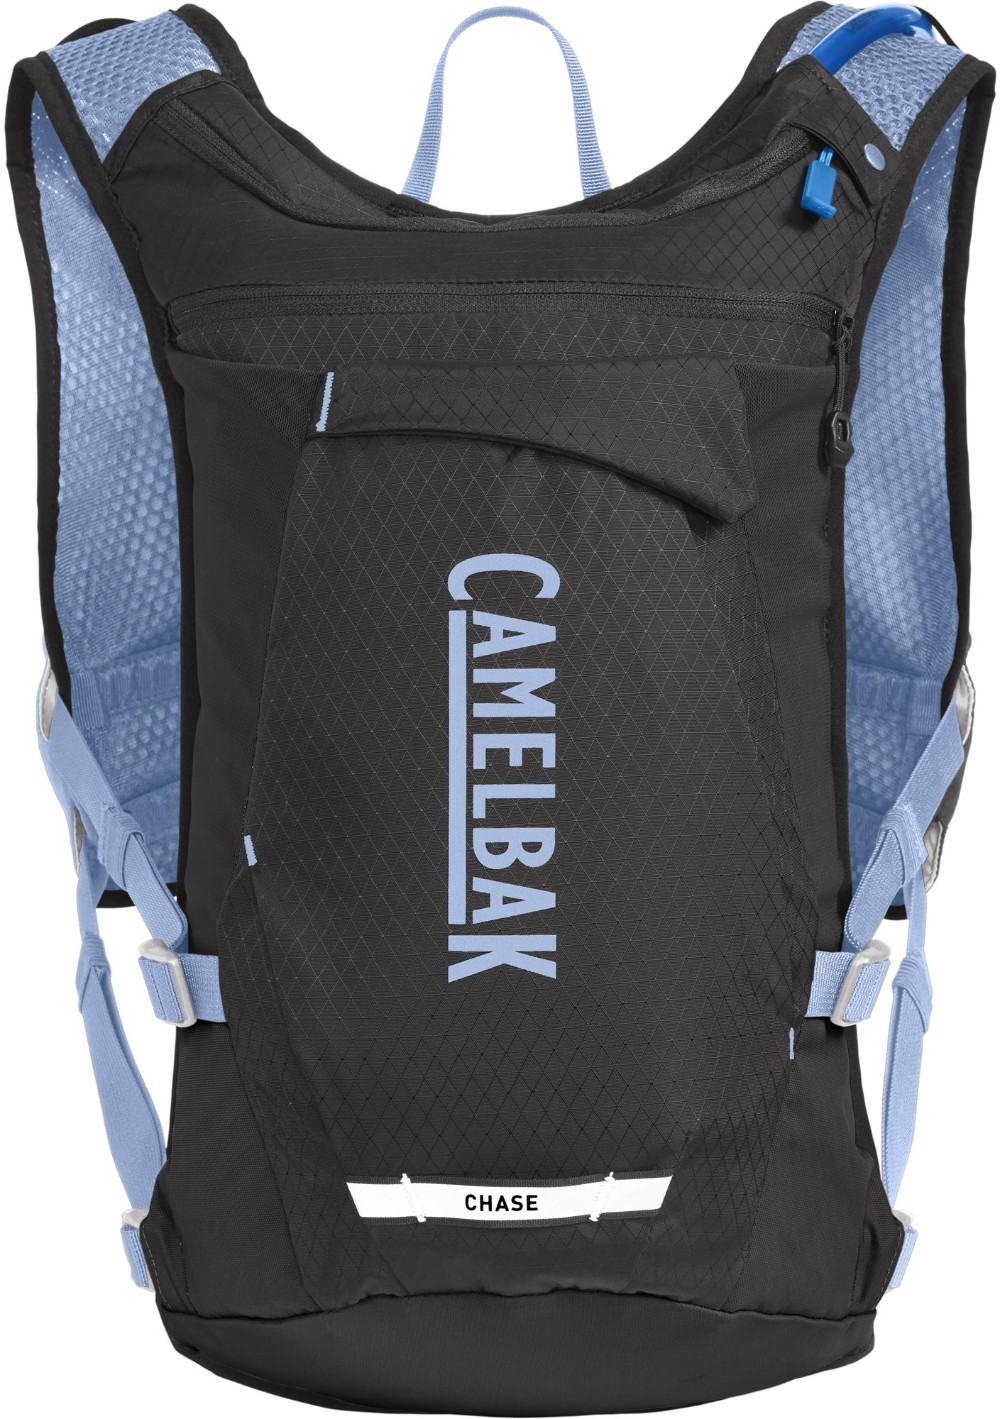 Chase Adventure Pack 8L Womens Hydration Vest with 2L Reservoir image 1